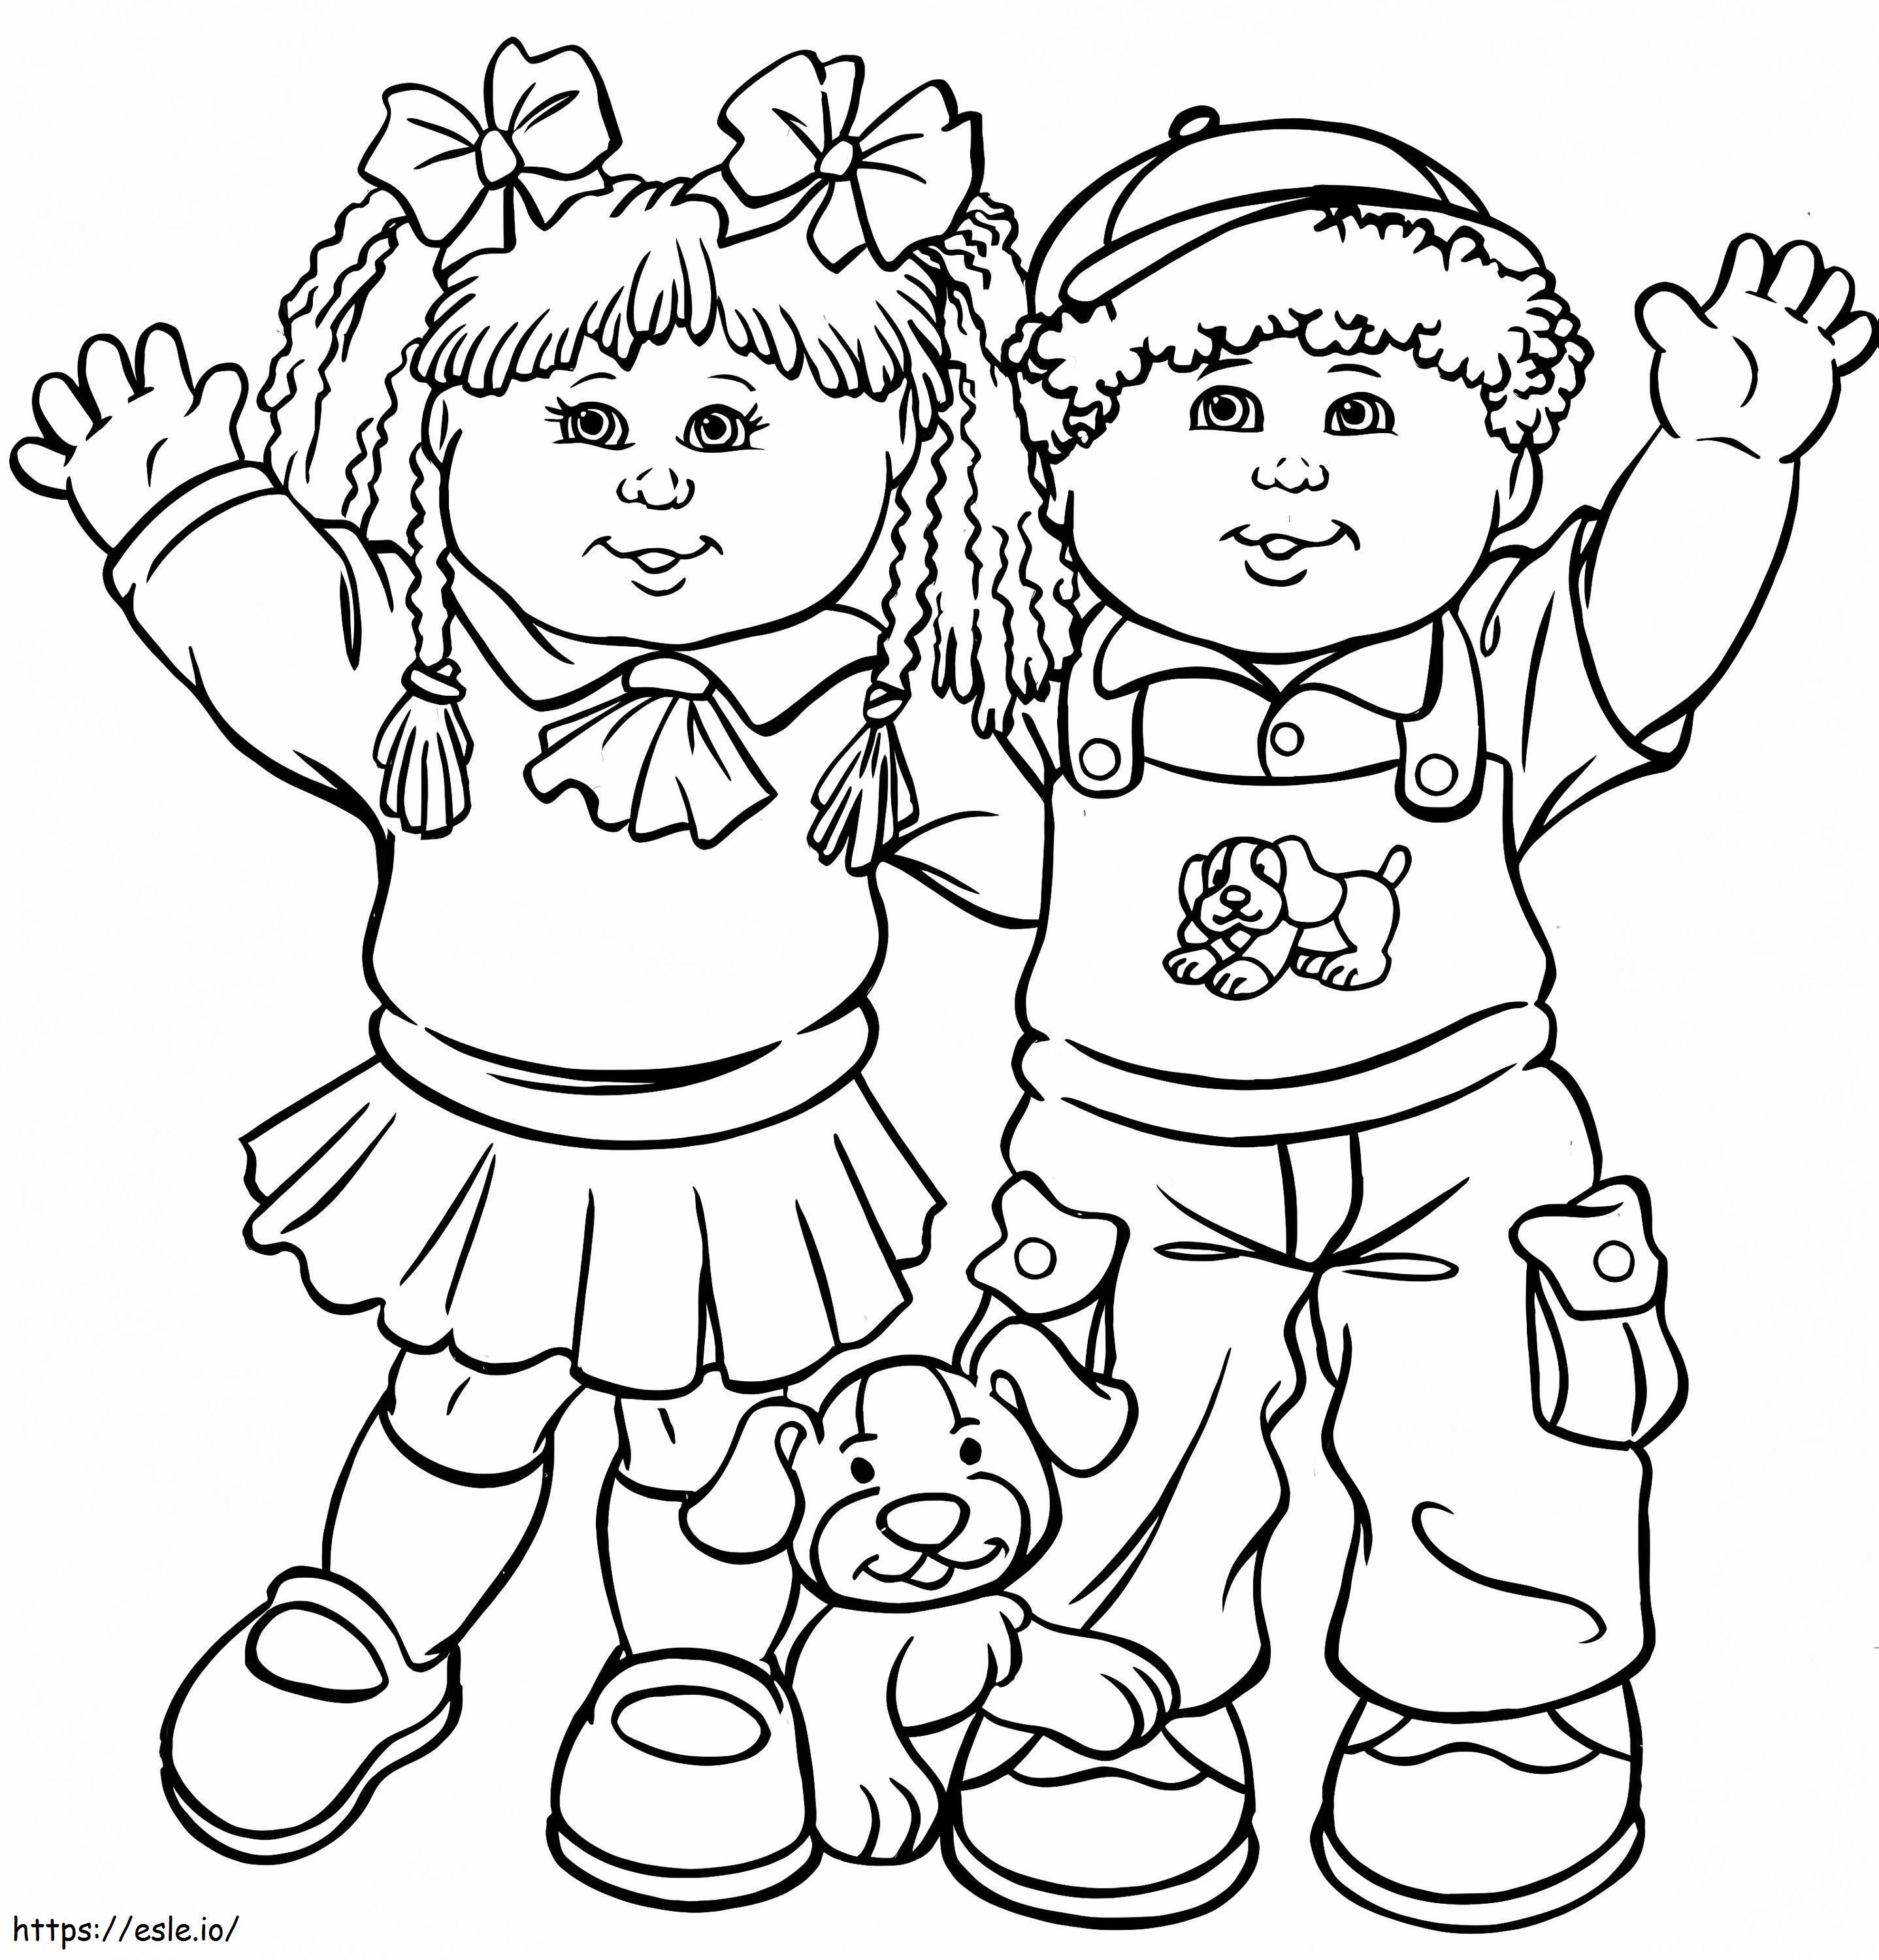 Friendship 10 coloring page